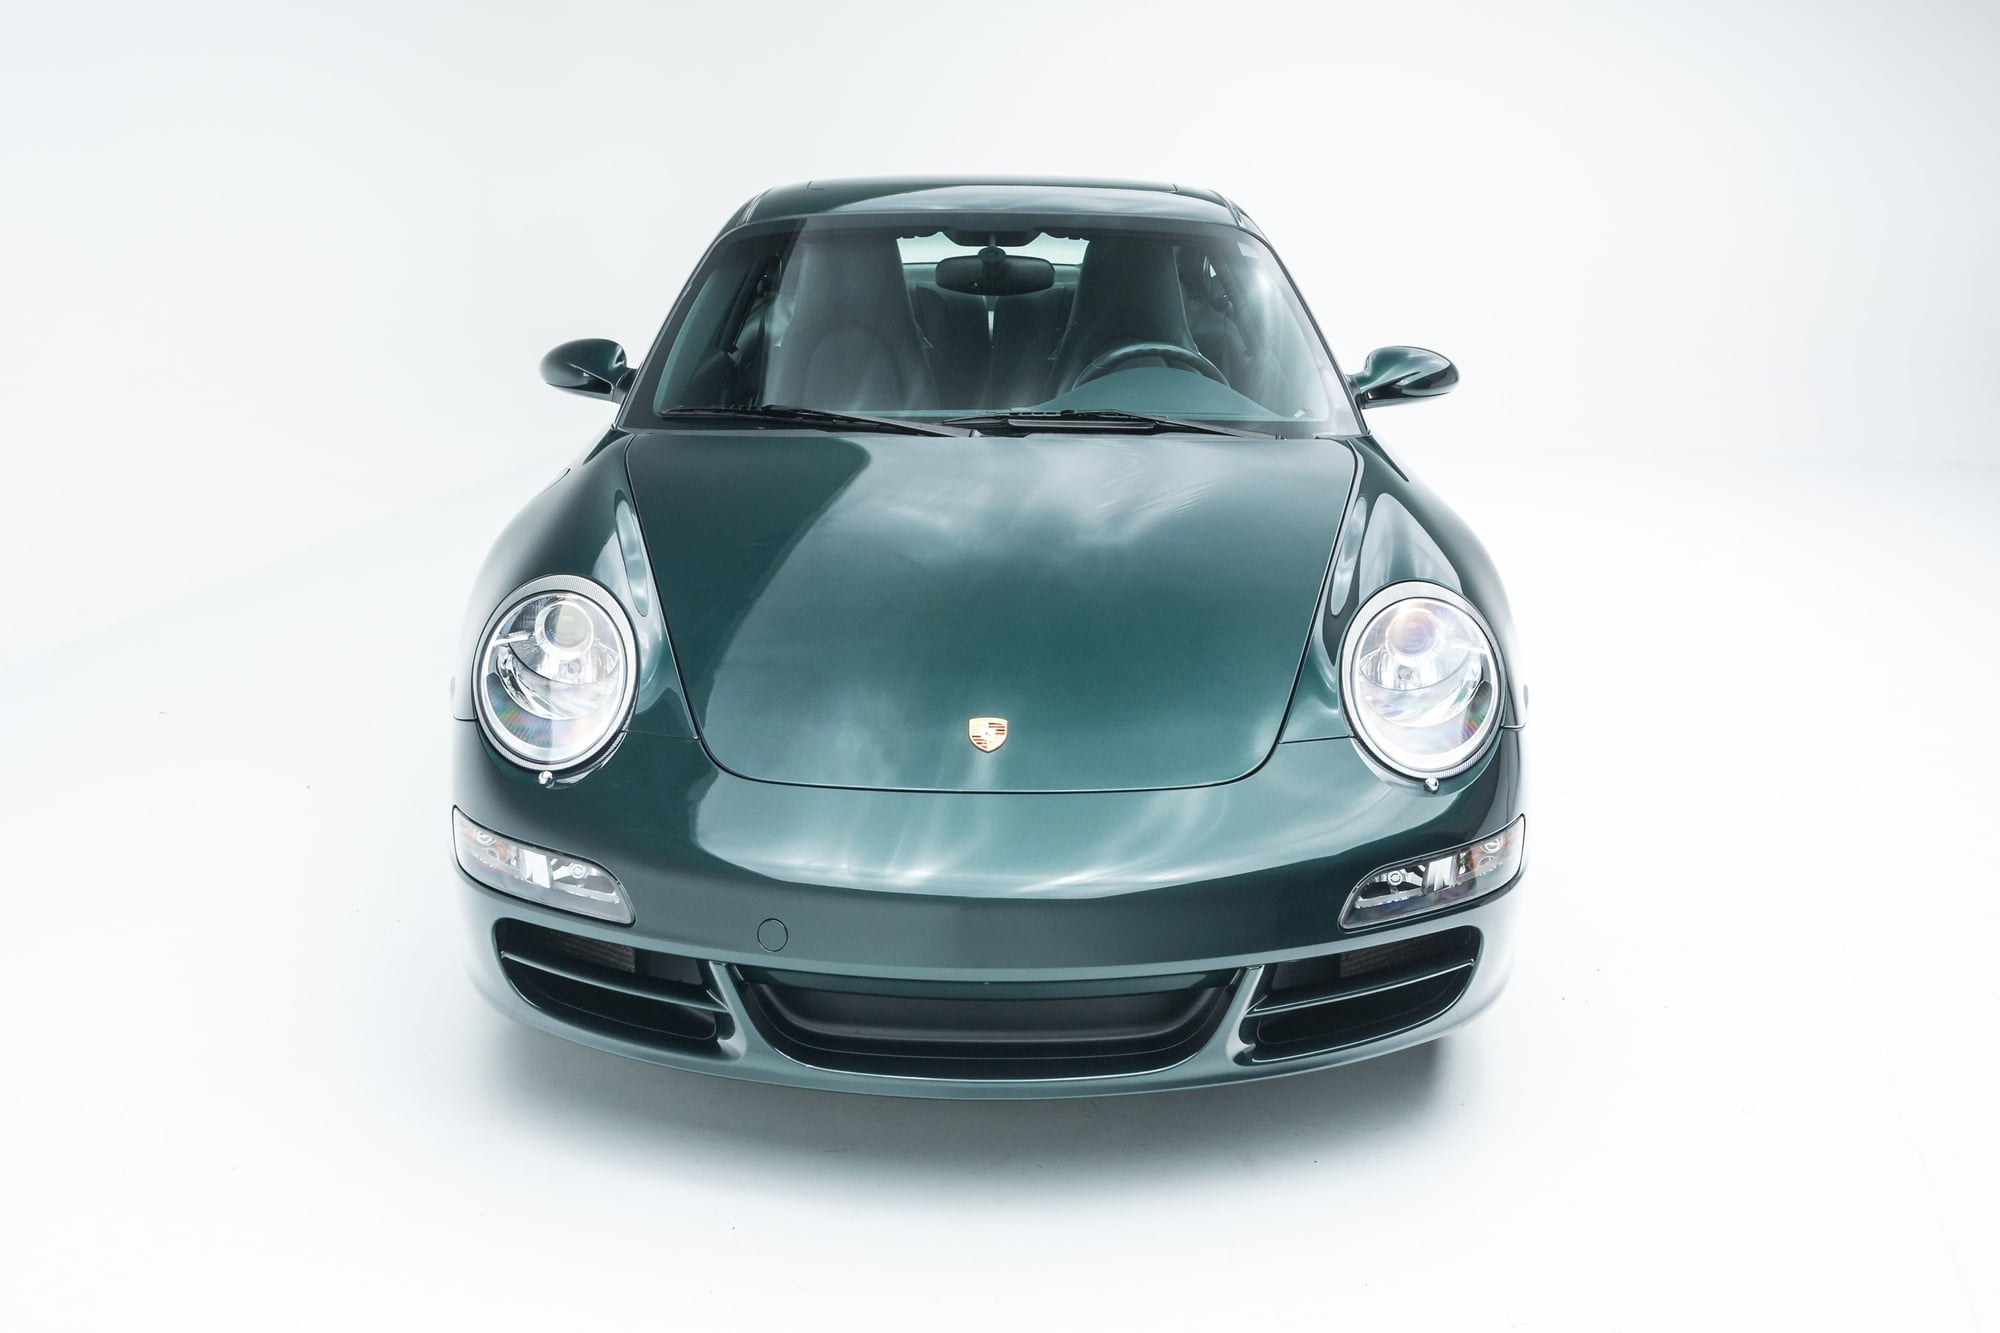 2006 Porsche 911 - 2006 997 C4S Forest Green/Palm Green 47K Miles - Used - VIN WP0AB29936S744023 - 6 cyl - AWD - Manual - Coupe - Other - Irvine, CA 92603, United States